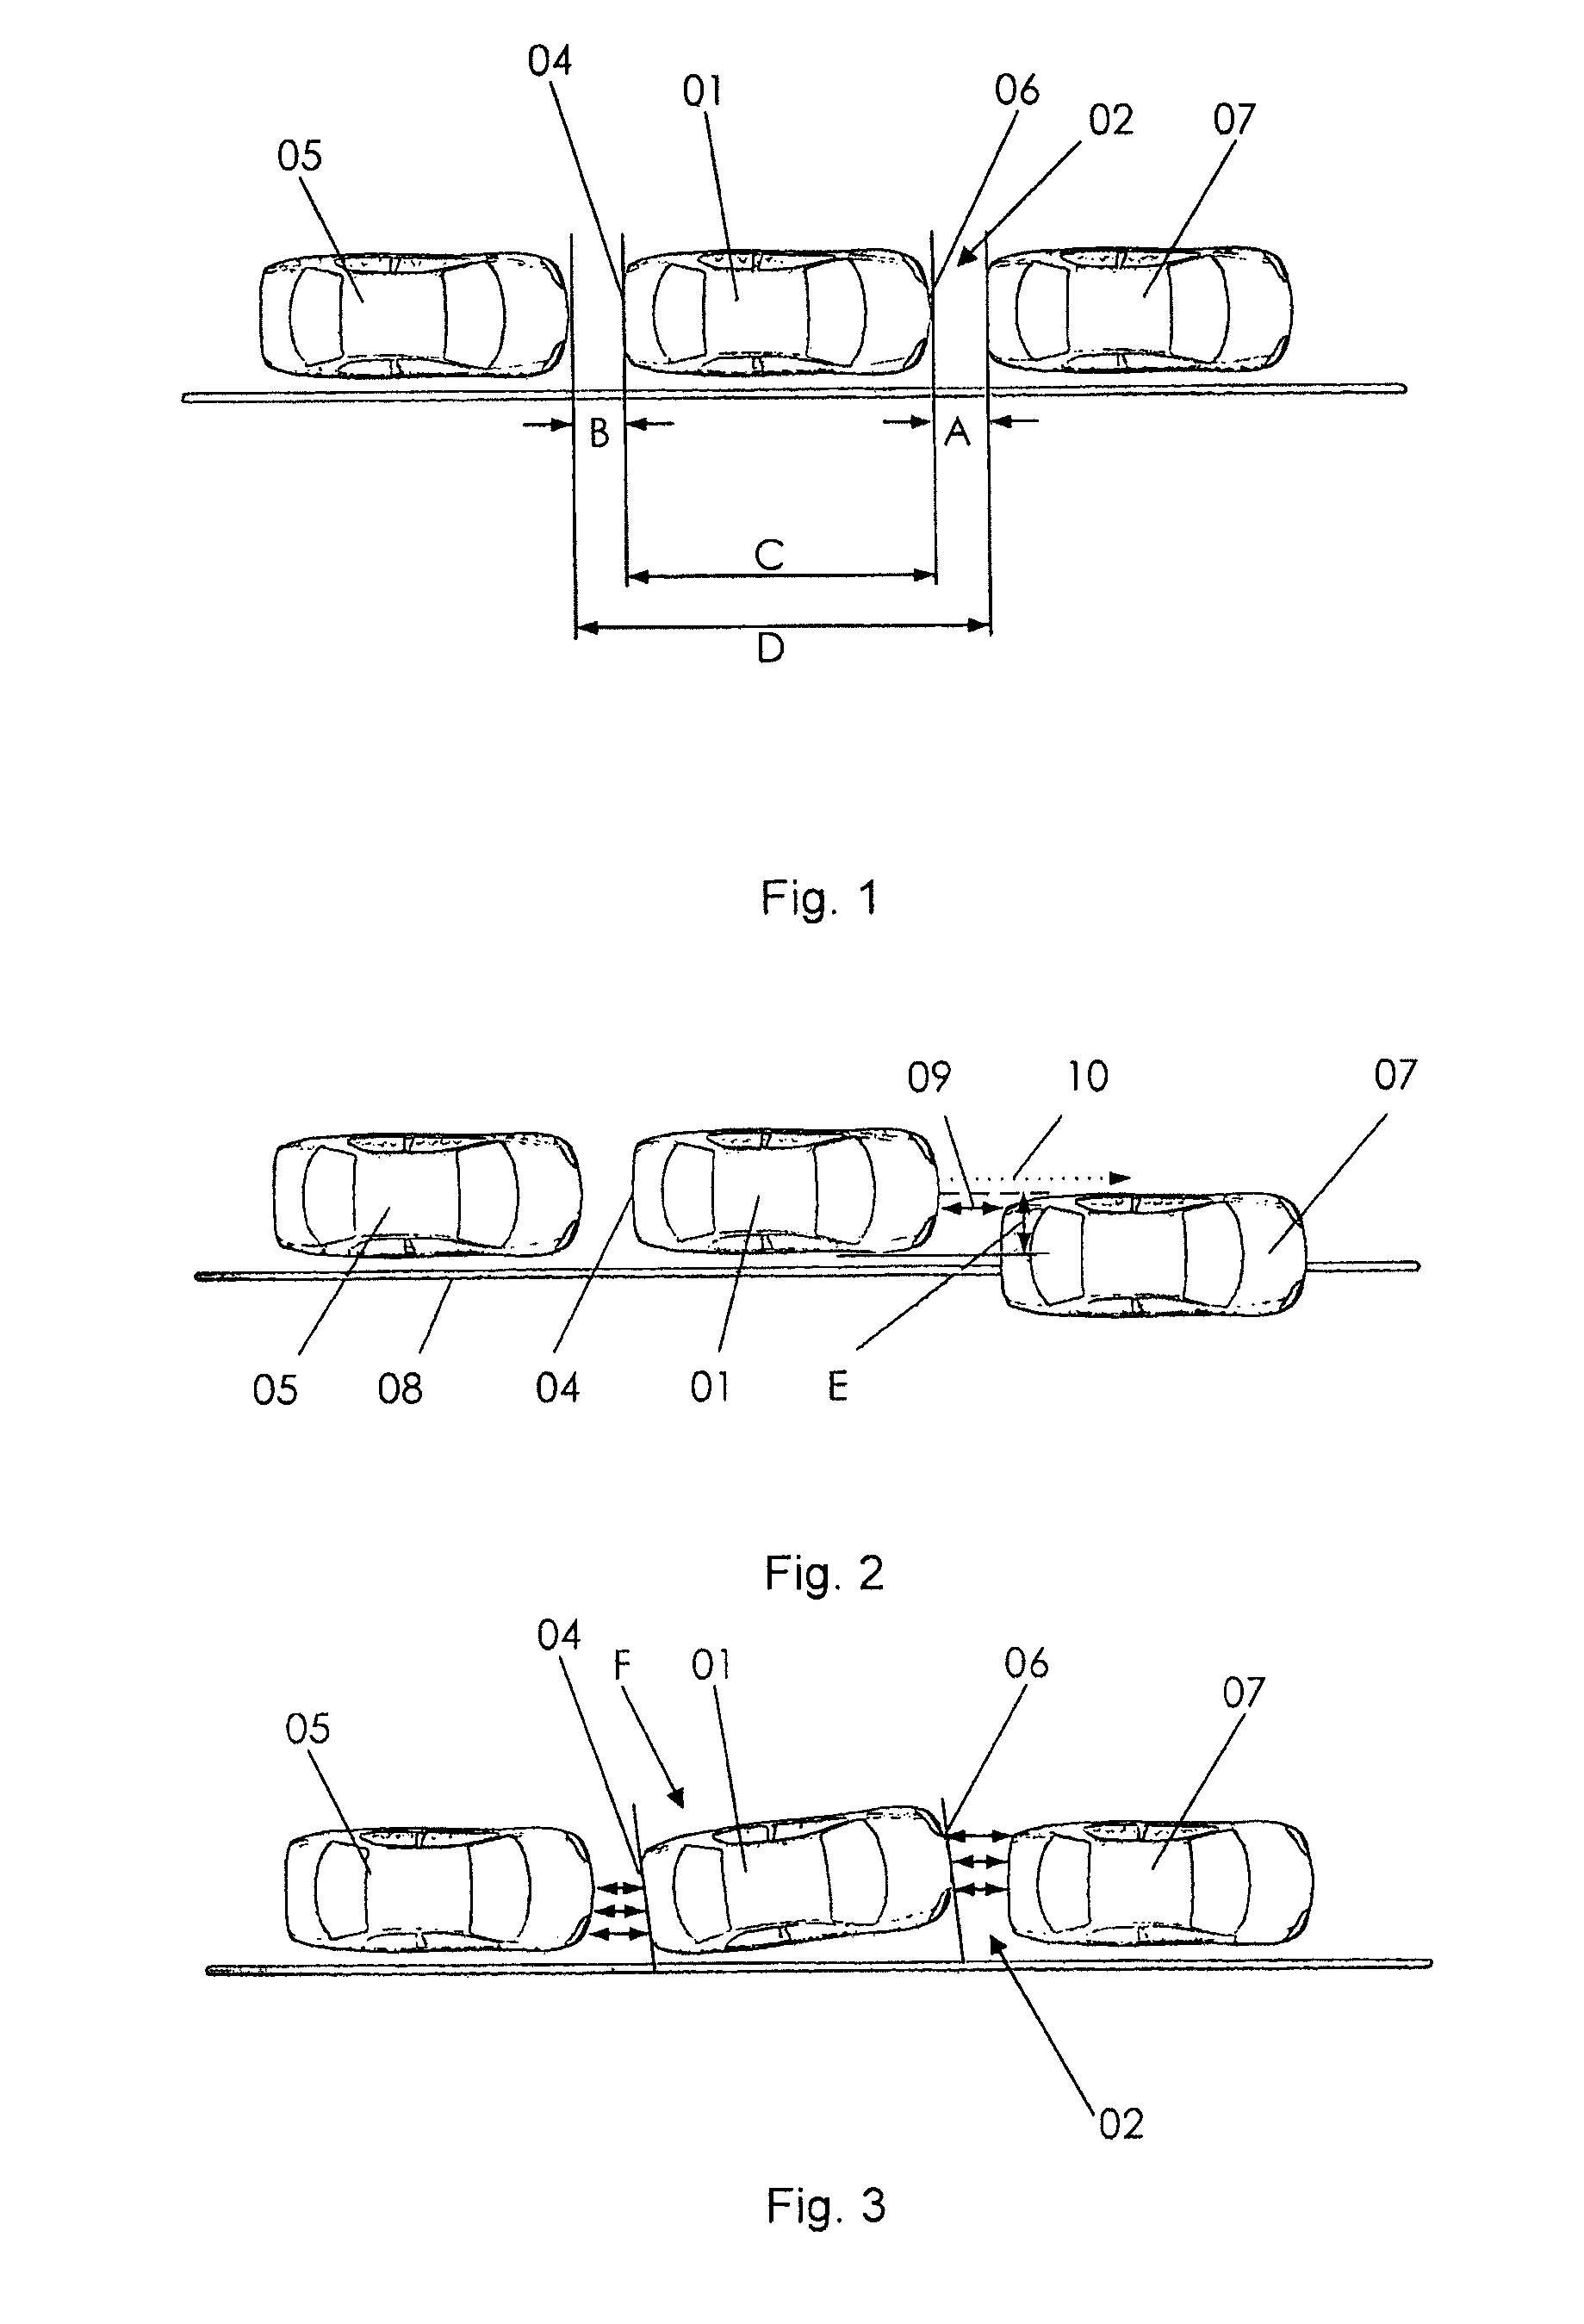 Method and device for assisting a driver of a vehicle in exiting from a parking space